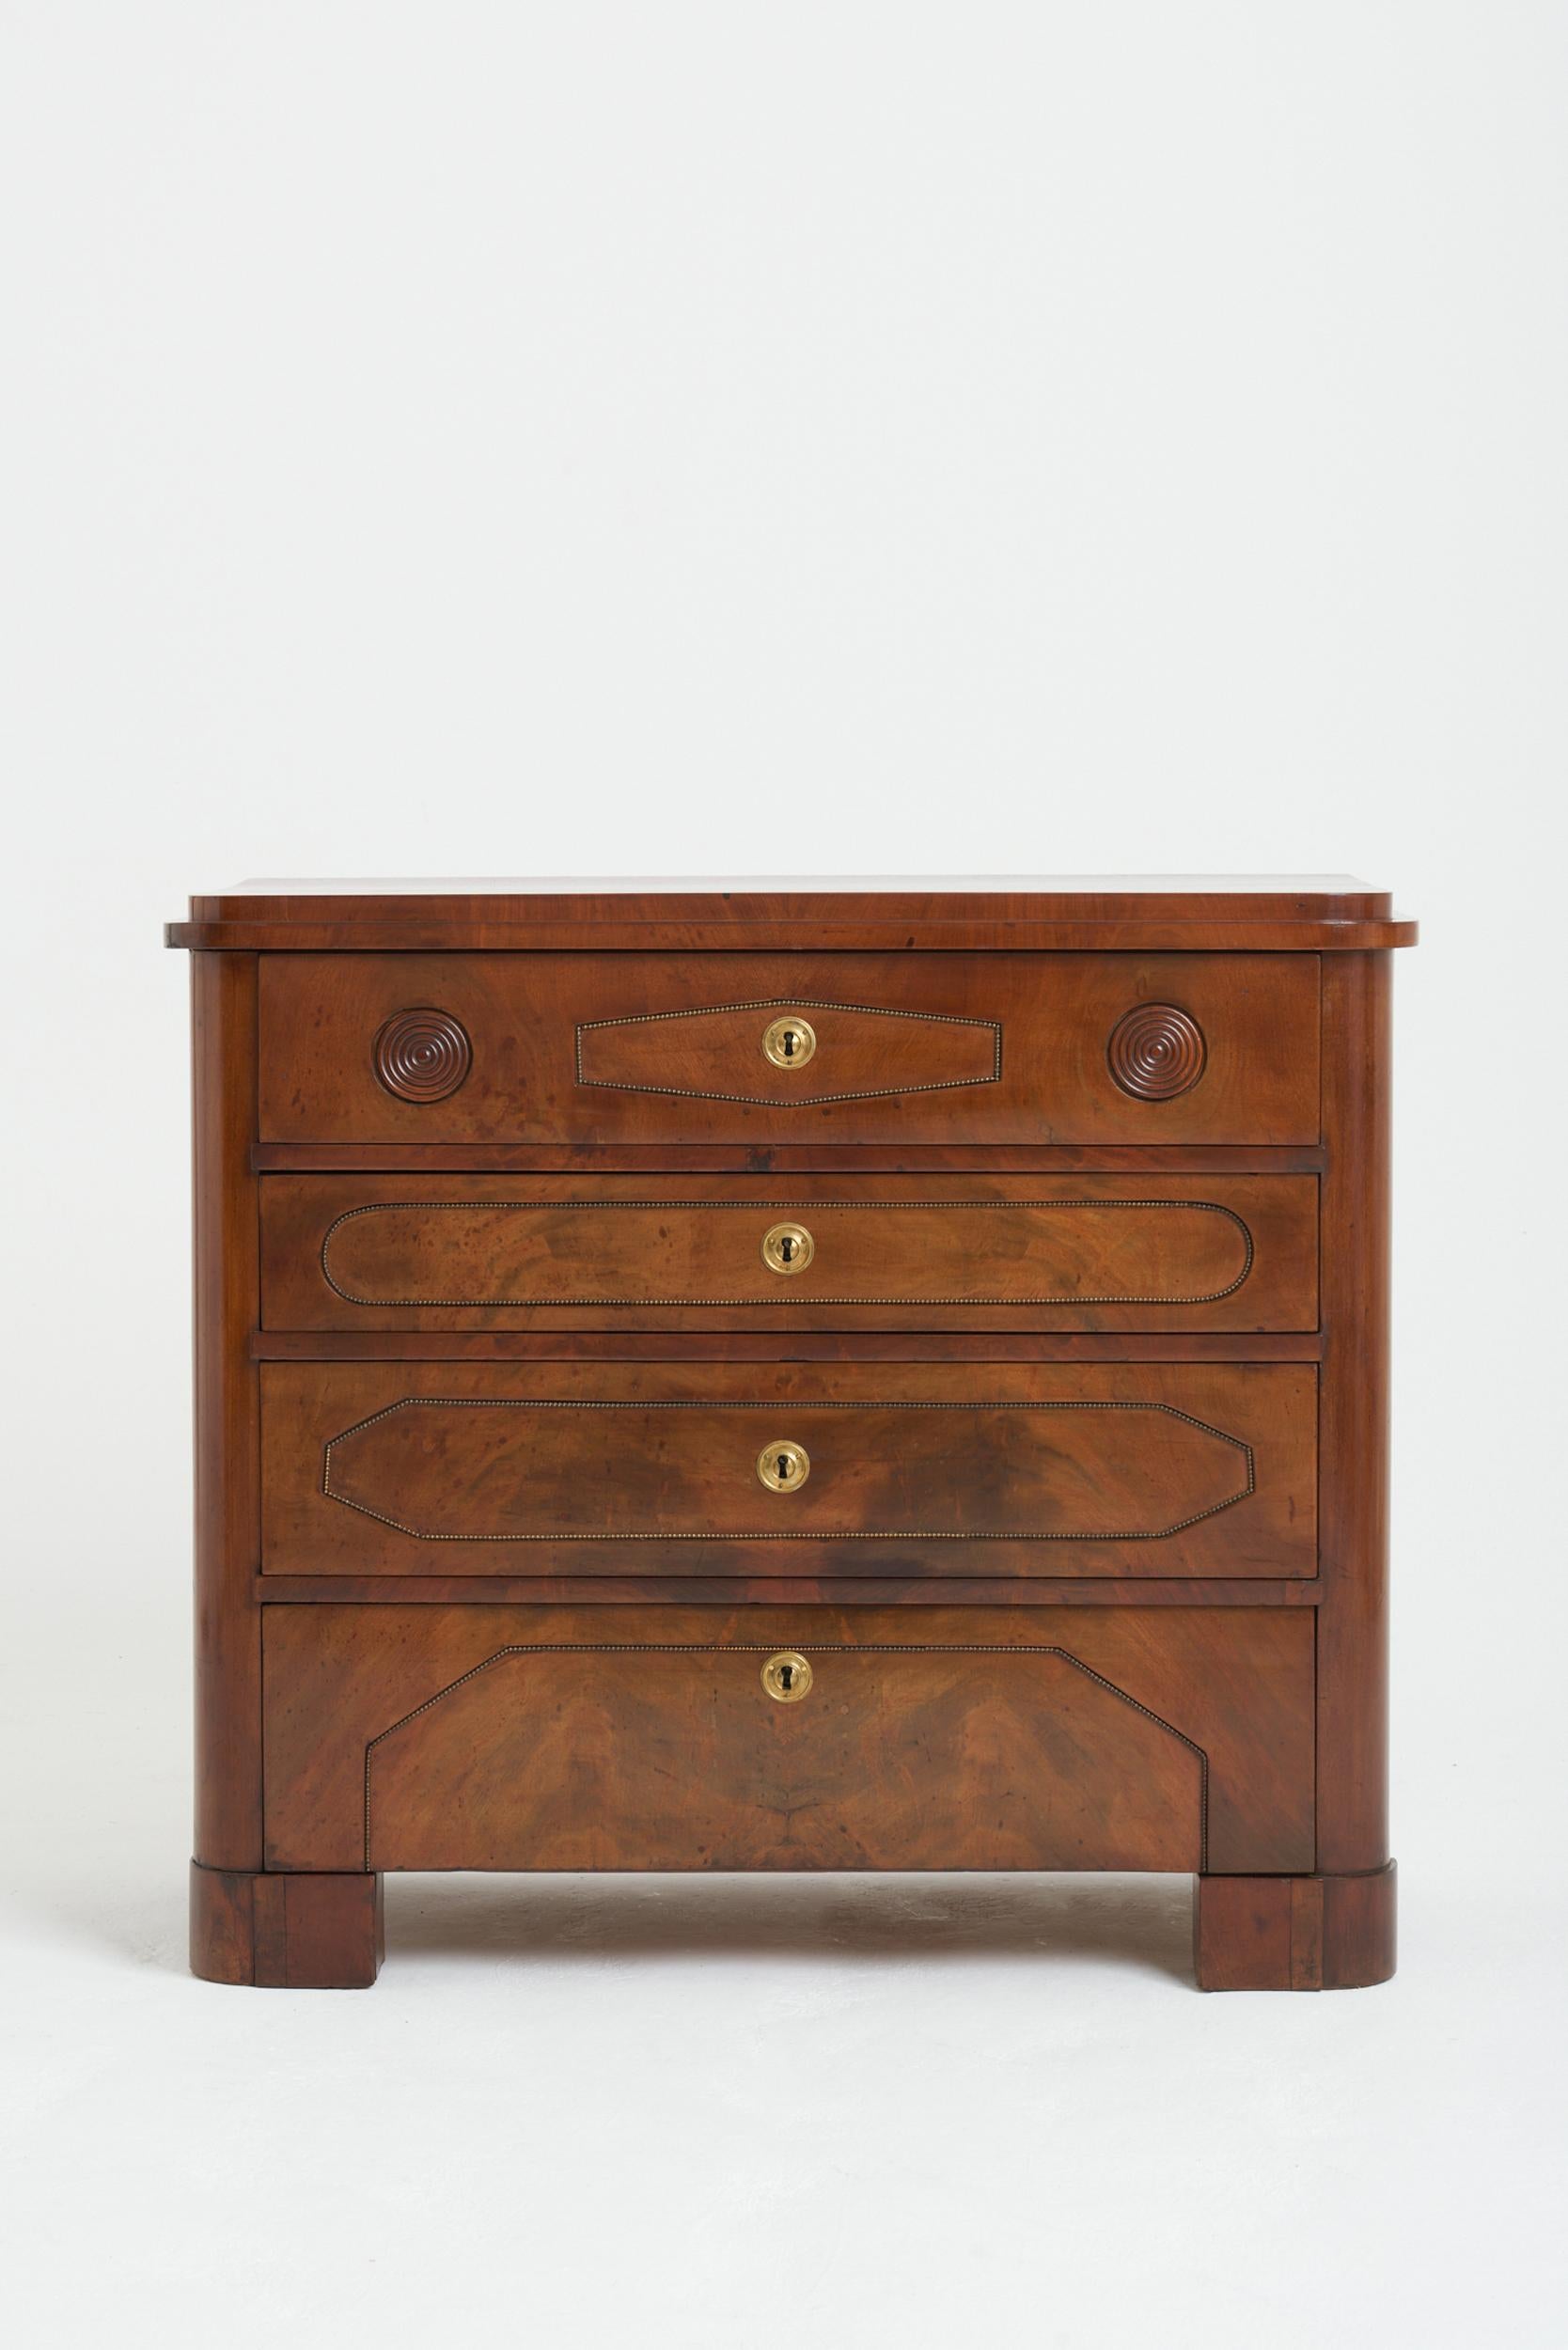 A Charles XIV John period (Karl XIV Johan, King of Sueden and Norway 1818-1844) mahogany chest of drawers, with brass beading details.
Sweden, Circa 1830.
107 cm wide by 93 cm high 52 cm deep